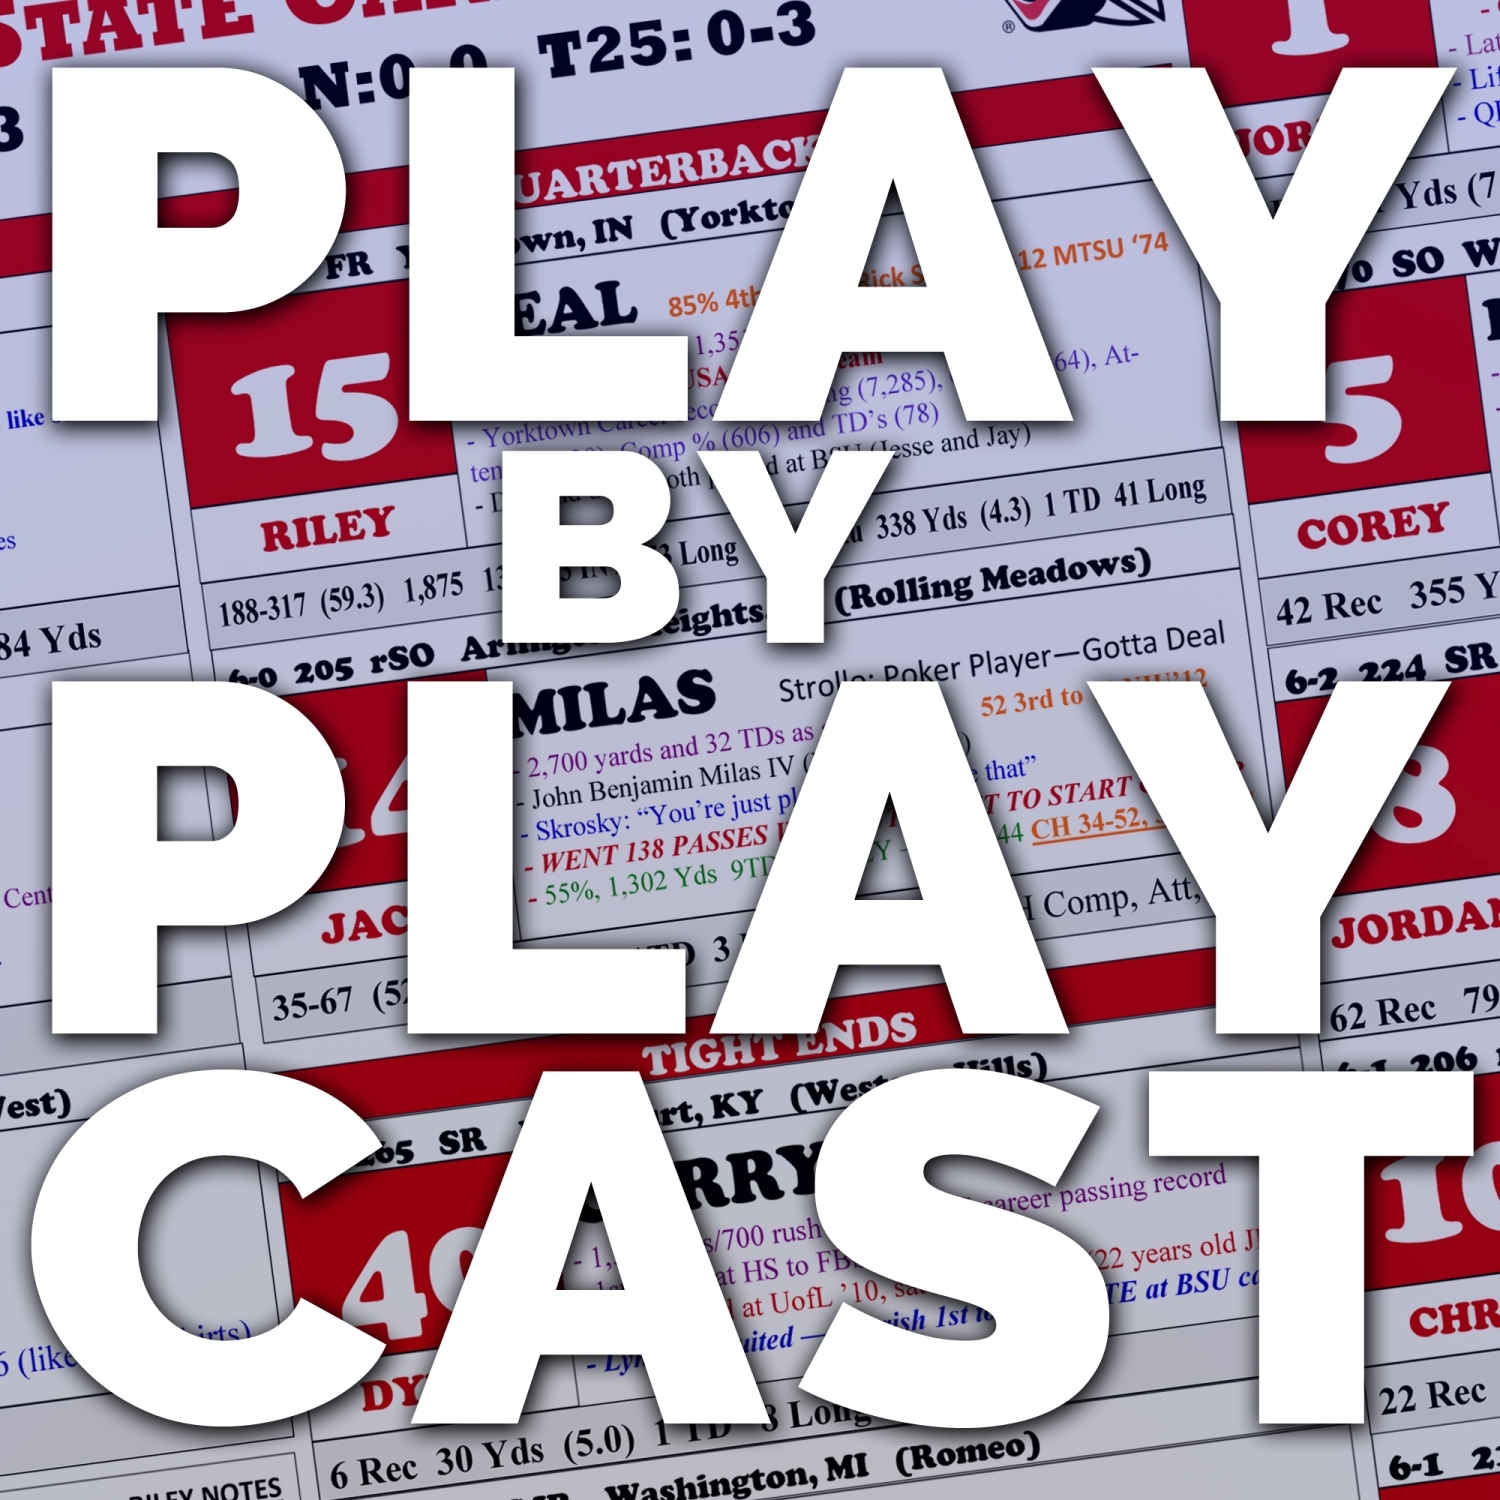 Play-by-Playcast Ep. 142 (Karl Ravech / ESPN)